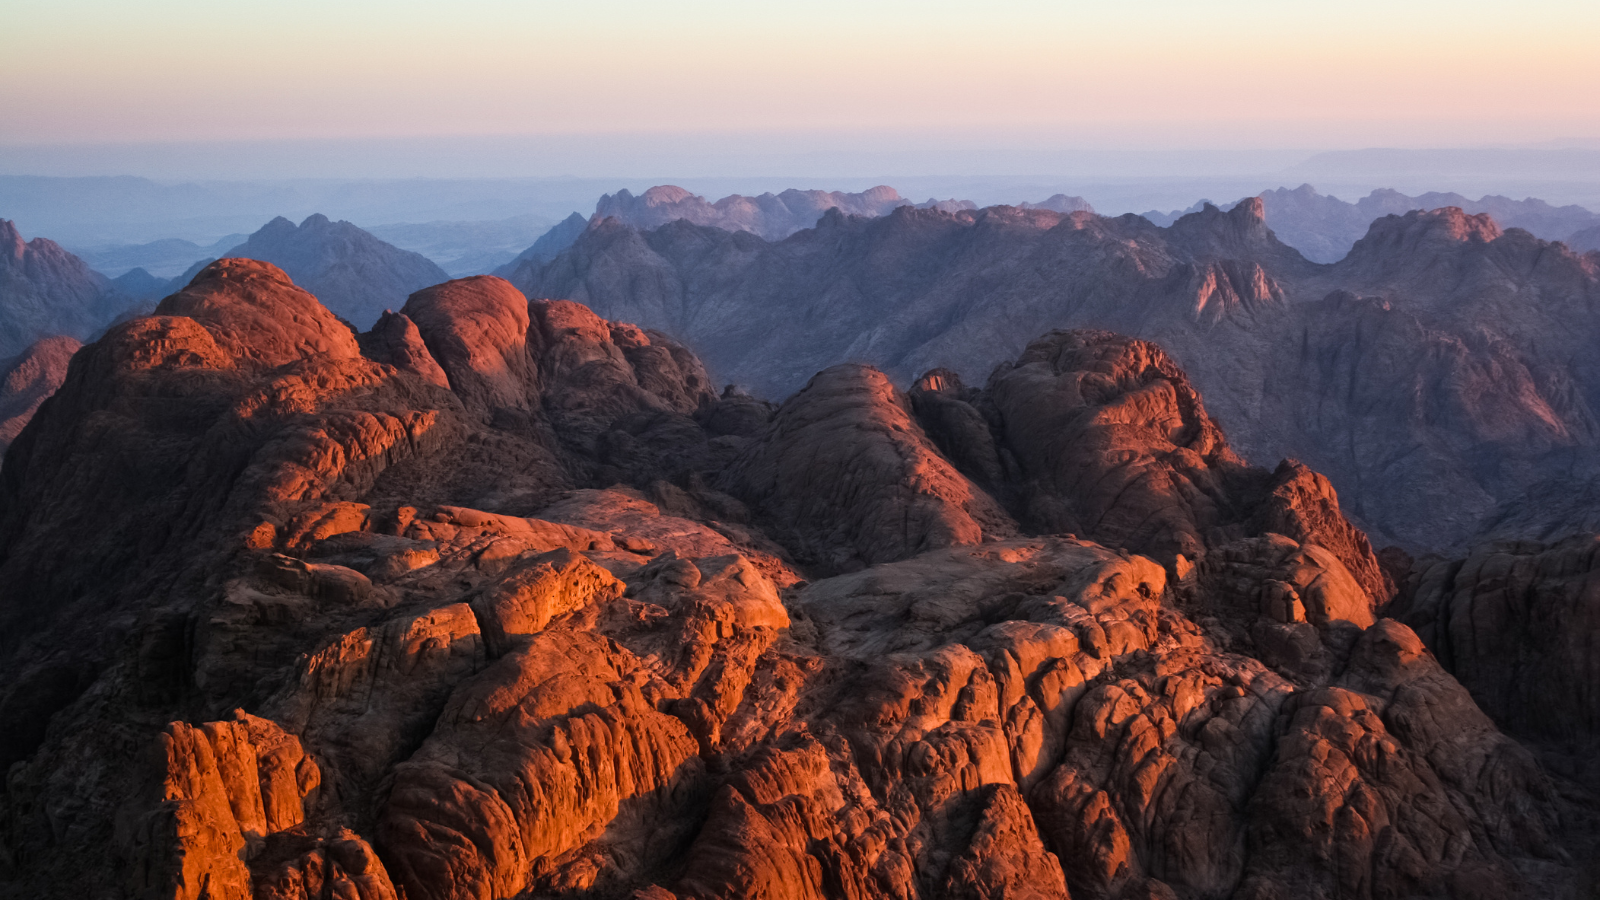 A view of the top of Mount Sinai in Egypt.